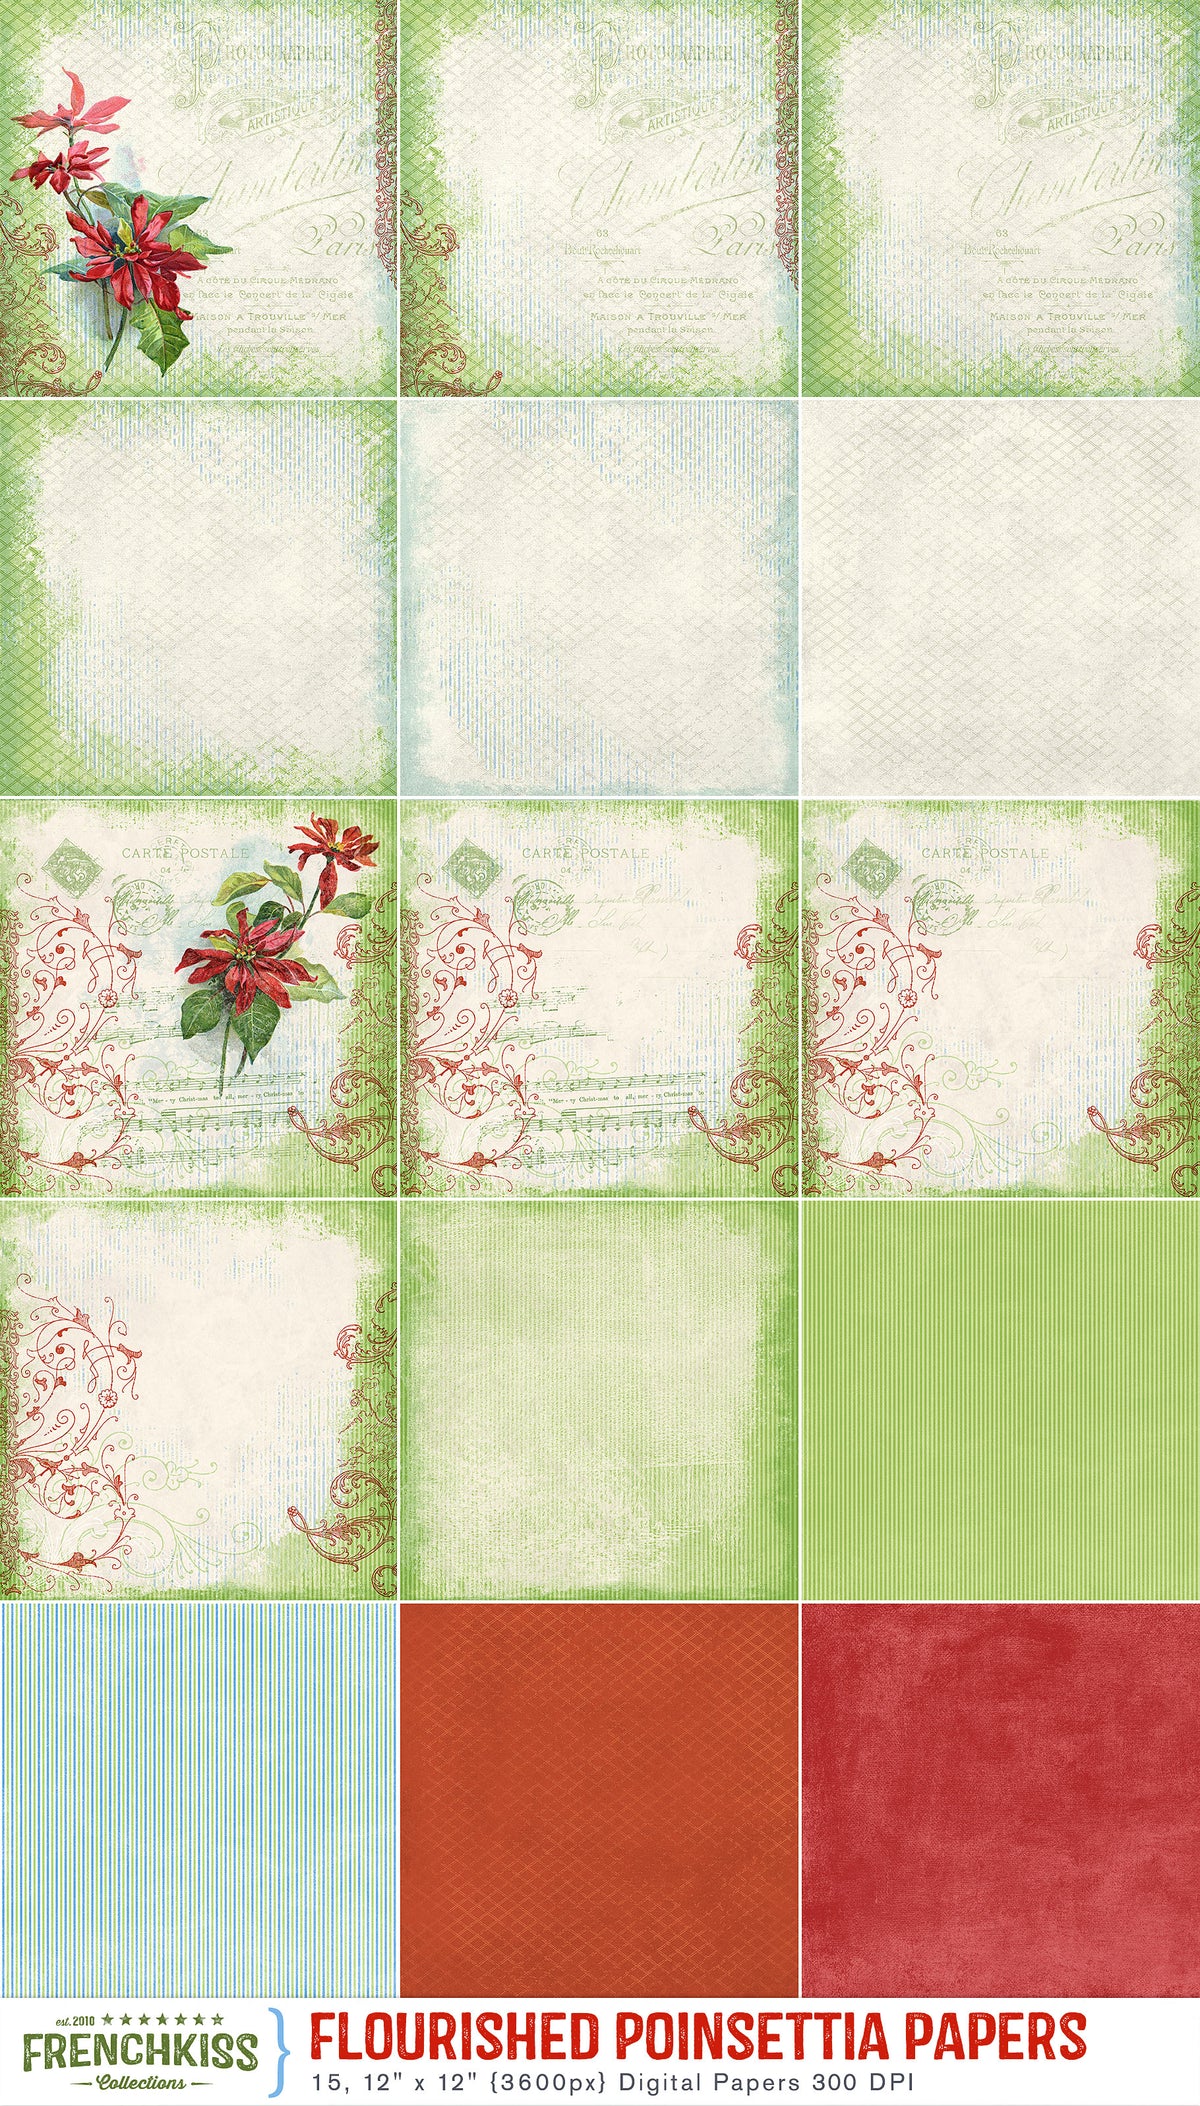 Flourished Poinsettia digital papers with versatile variations and coordinates..